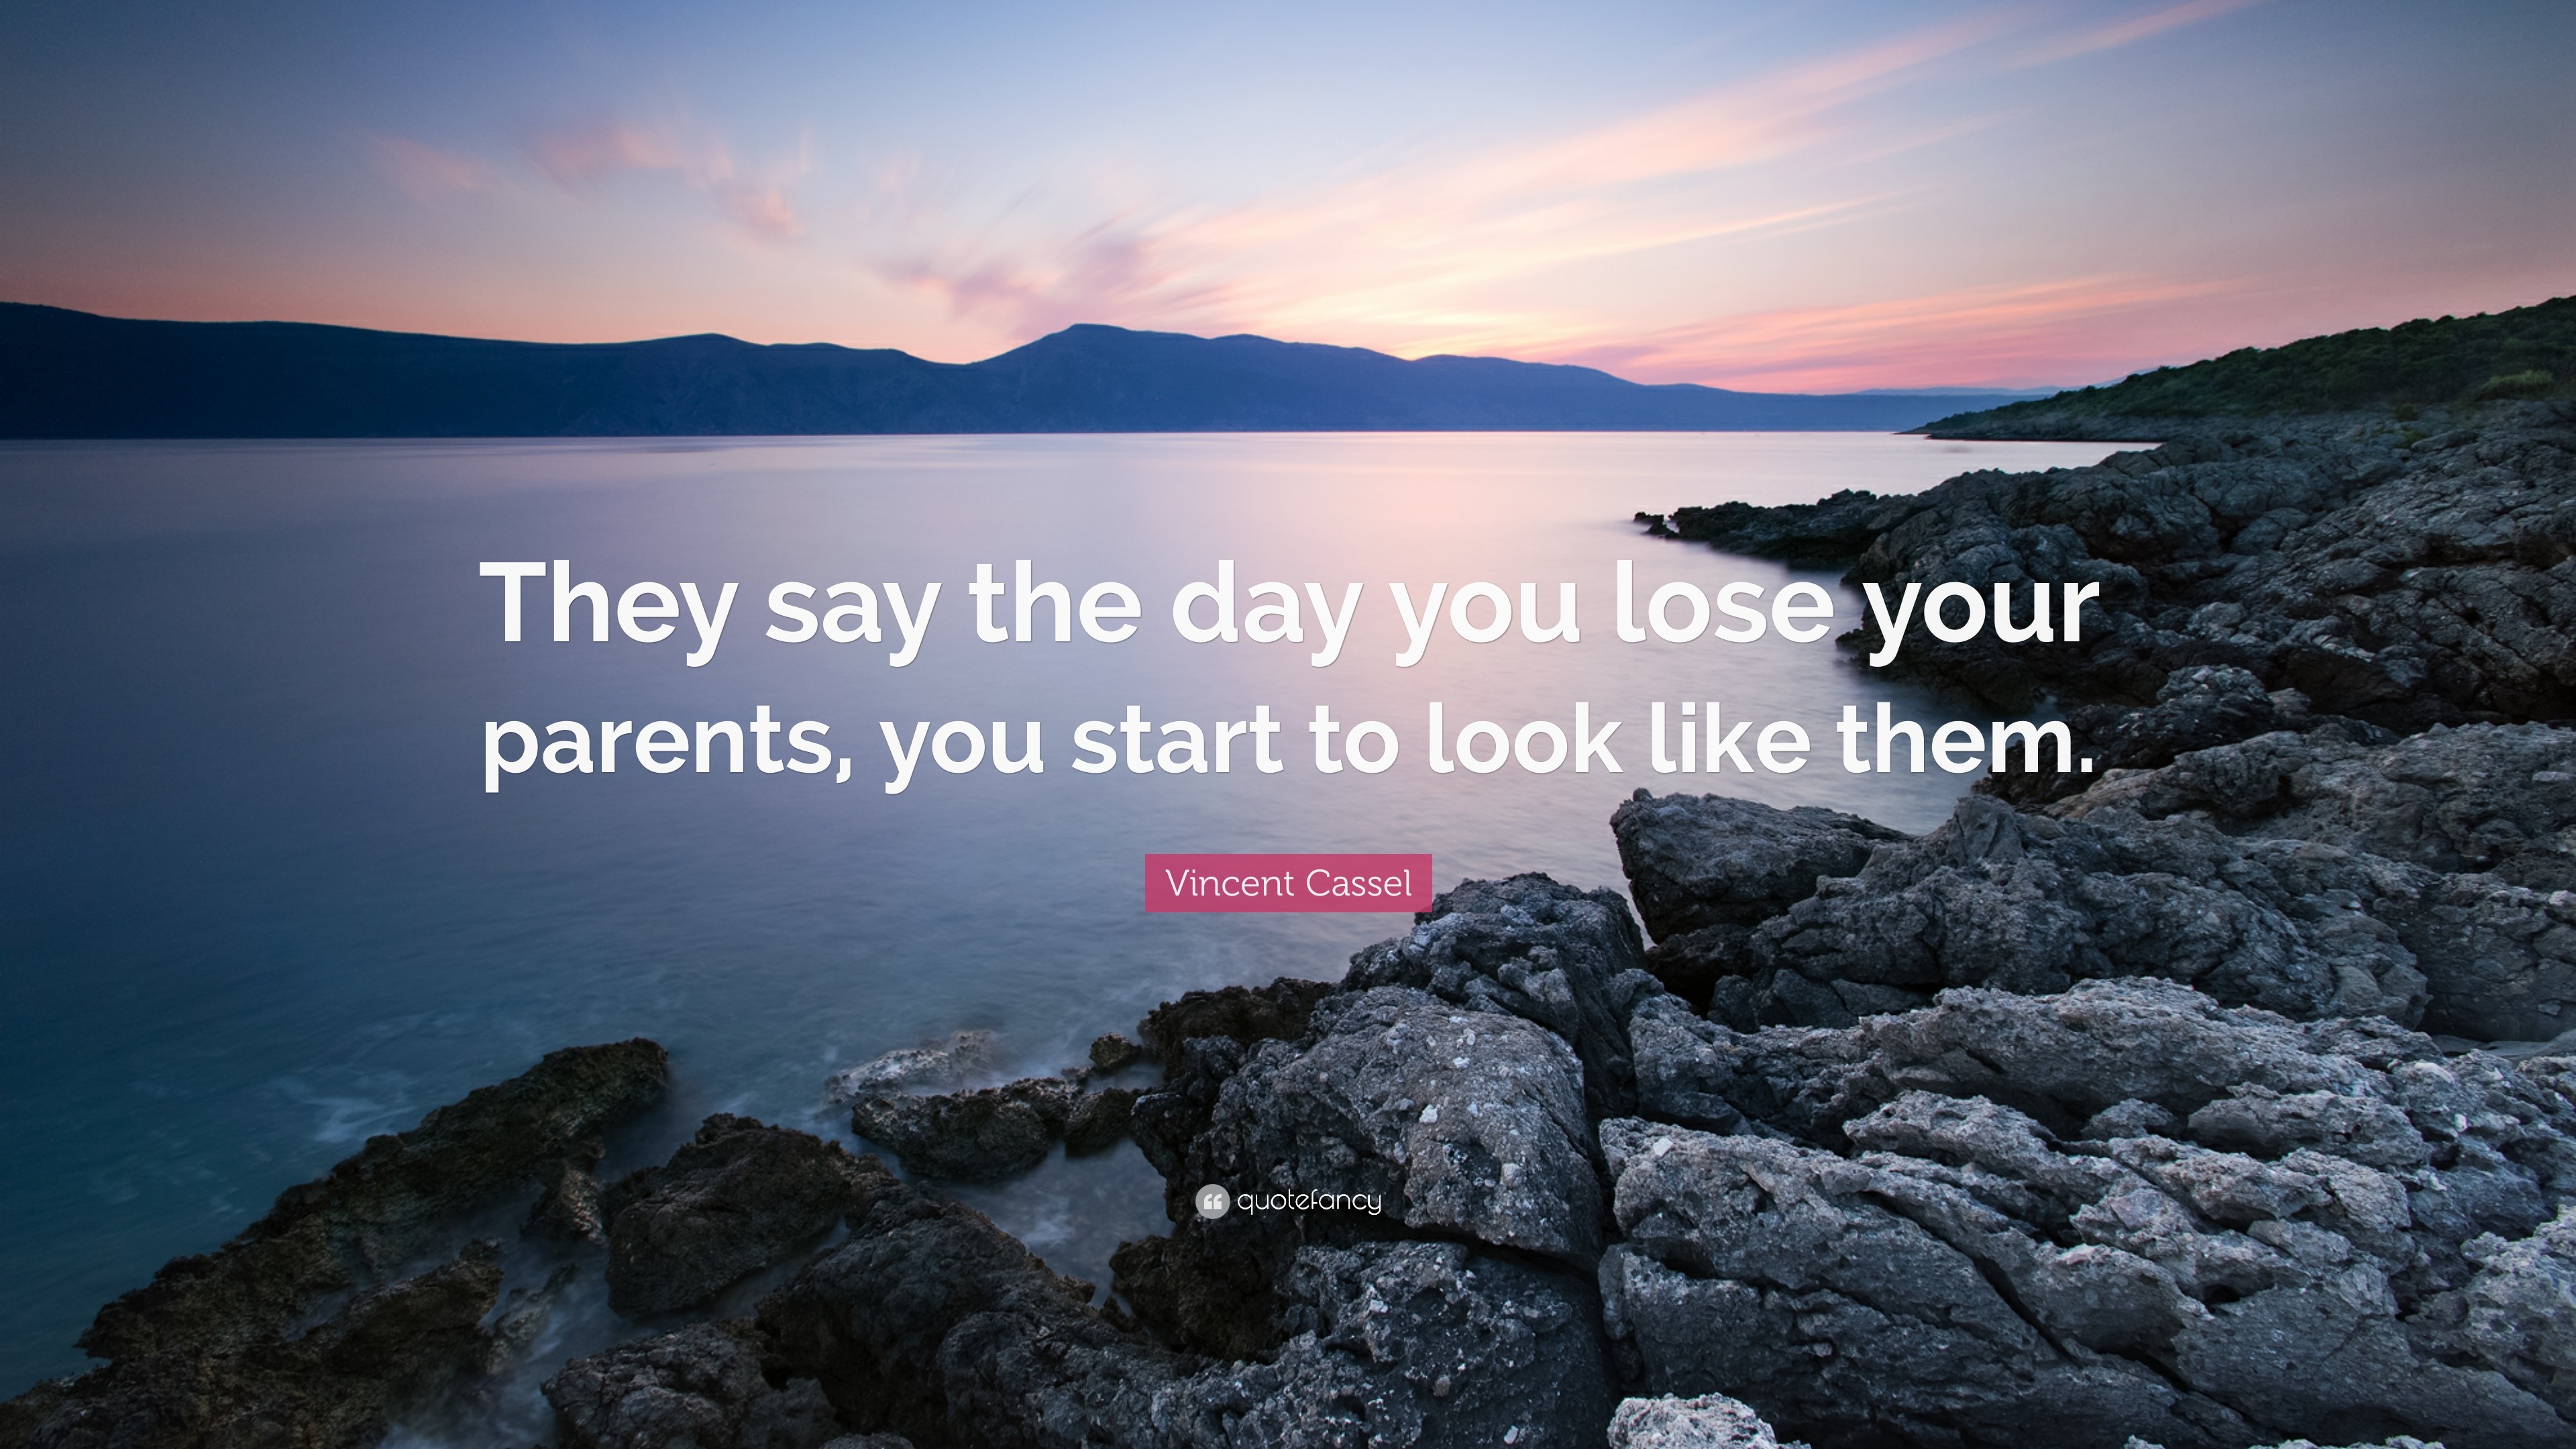 Vincent Cassel Quote: “They say the day you lose your parents, you ...